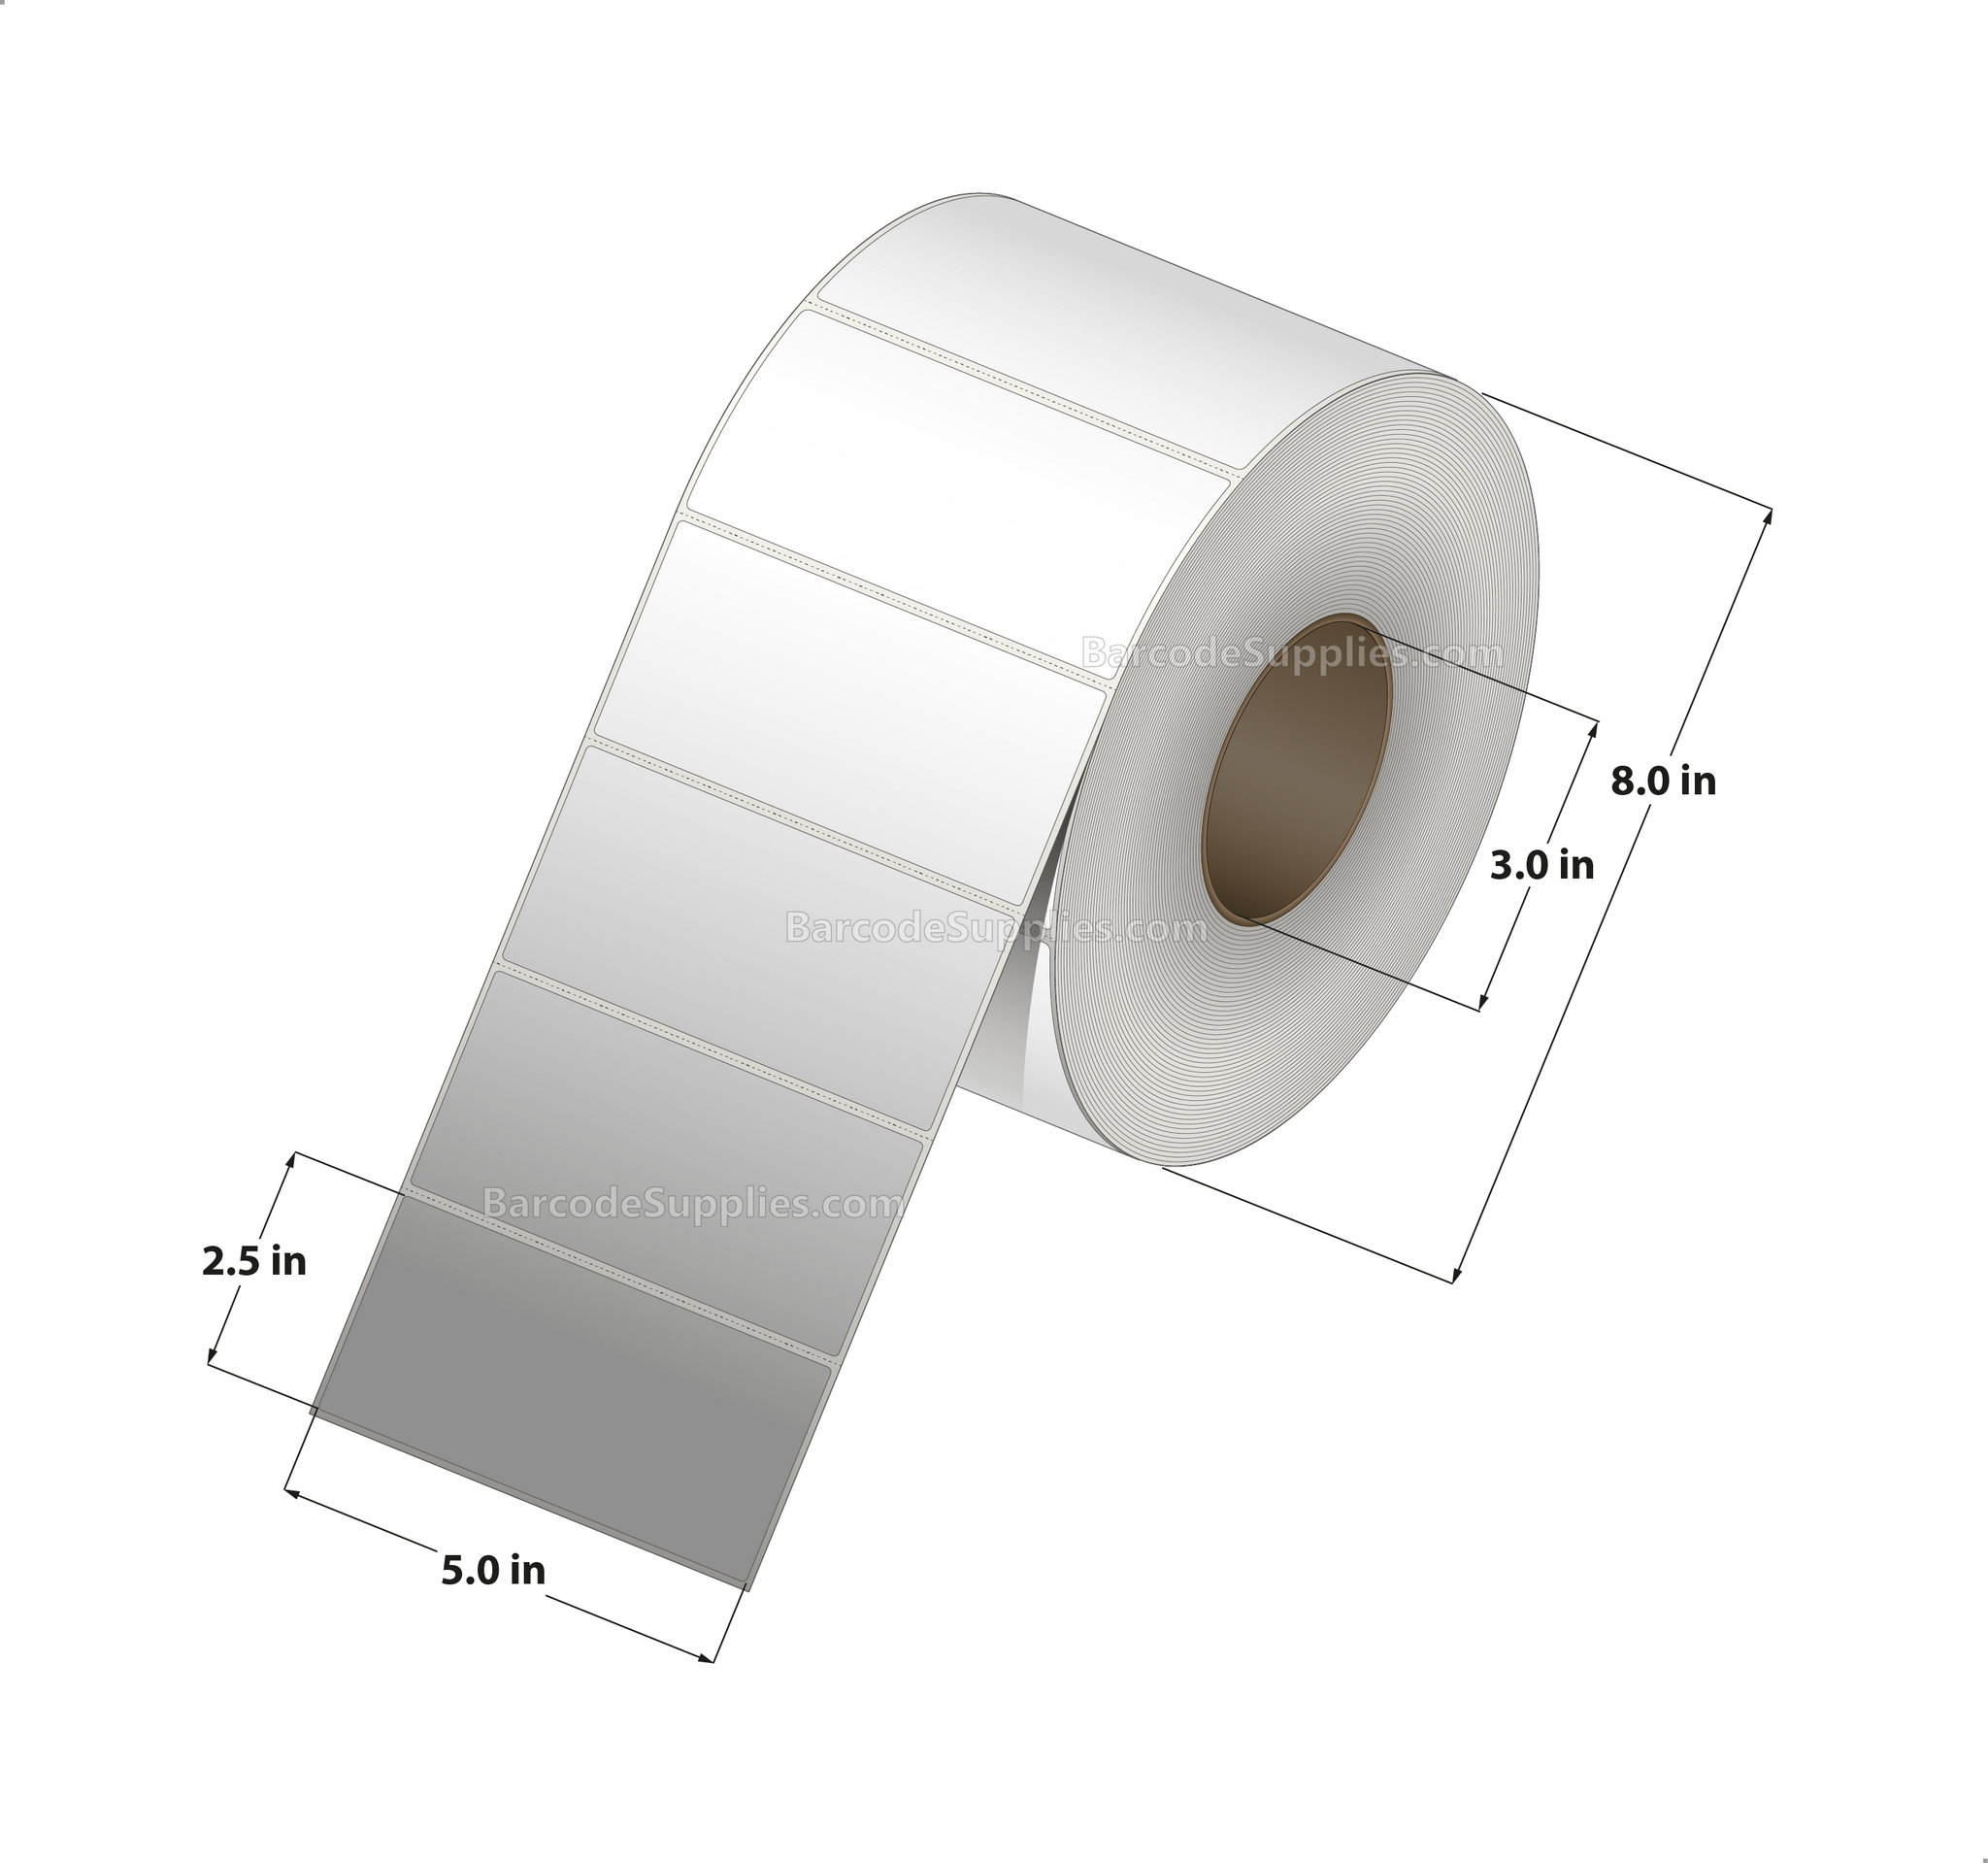 5 x 2.5 Thermal Transfer White Labels With Permanent Adhesive - Perforated - 2500 Labels Per Roll - Carton Of 4 Rolls - 10000 Labels Total - MPN: RT-5-25-2500-3